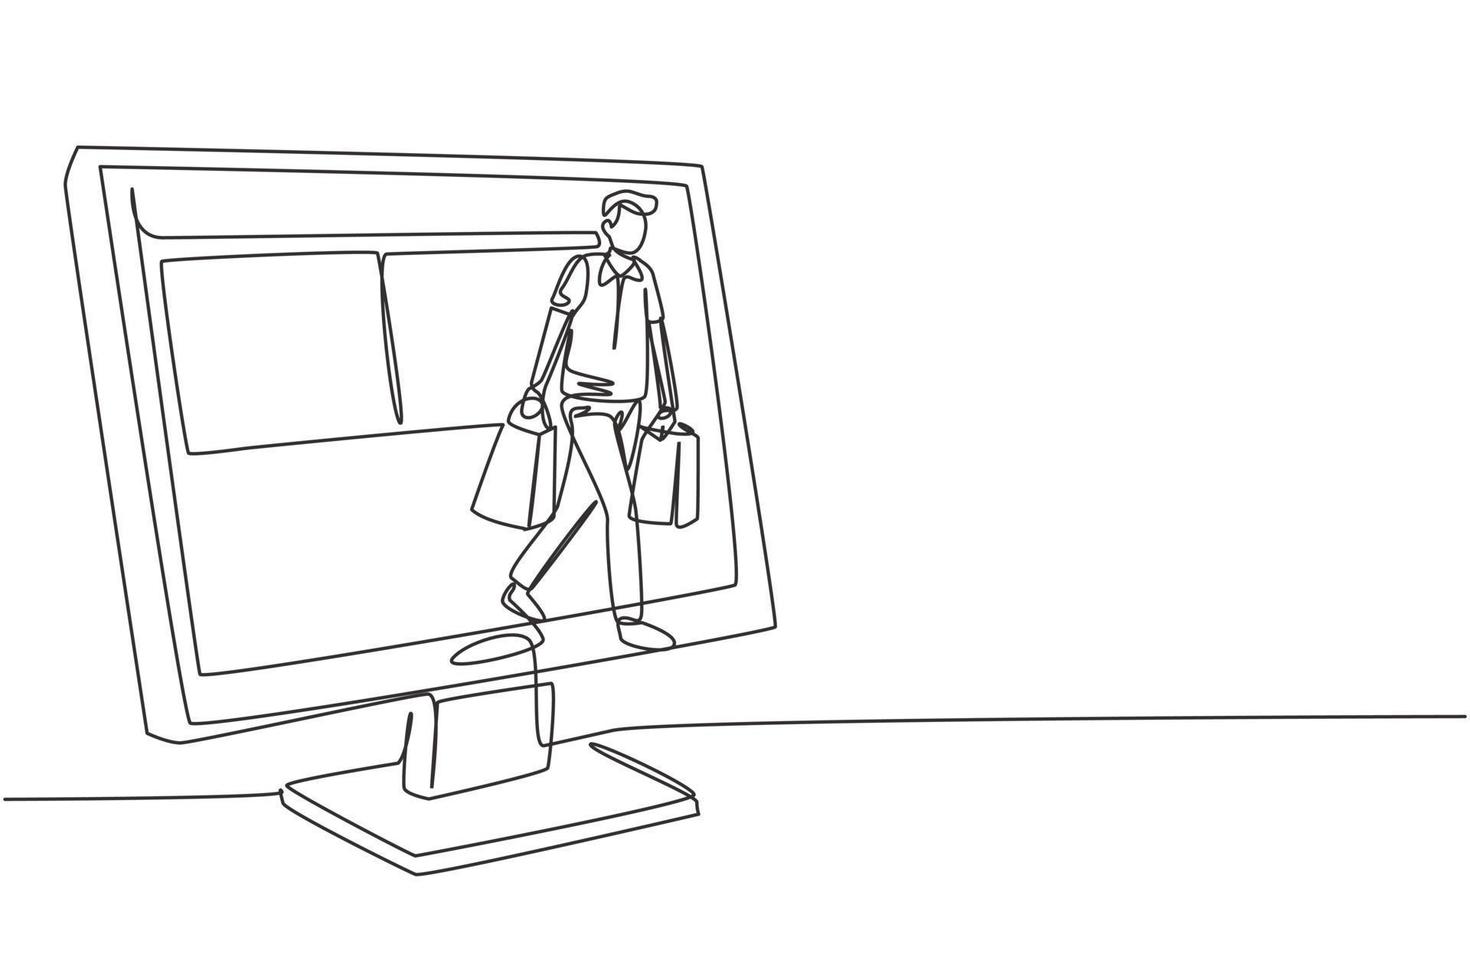 Continuous one line drawing young man coming out of monitor screen holding shopping bags. Sale, digital lifestyle, consumerism and people concept. Single line draw design vector graphic illustration